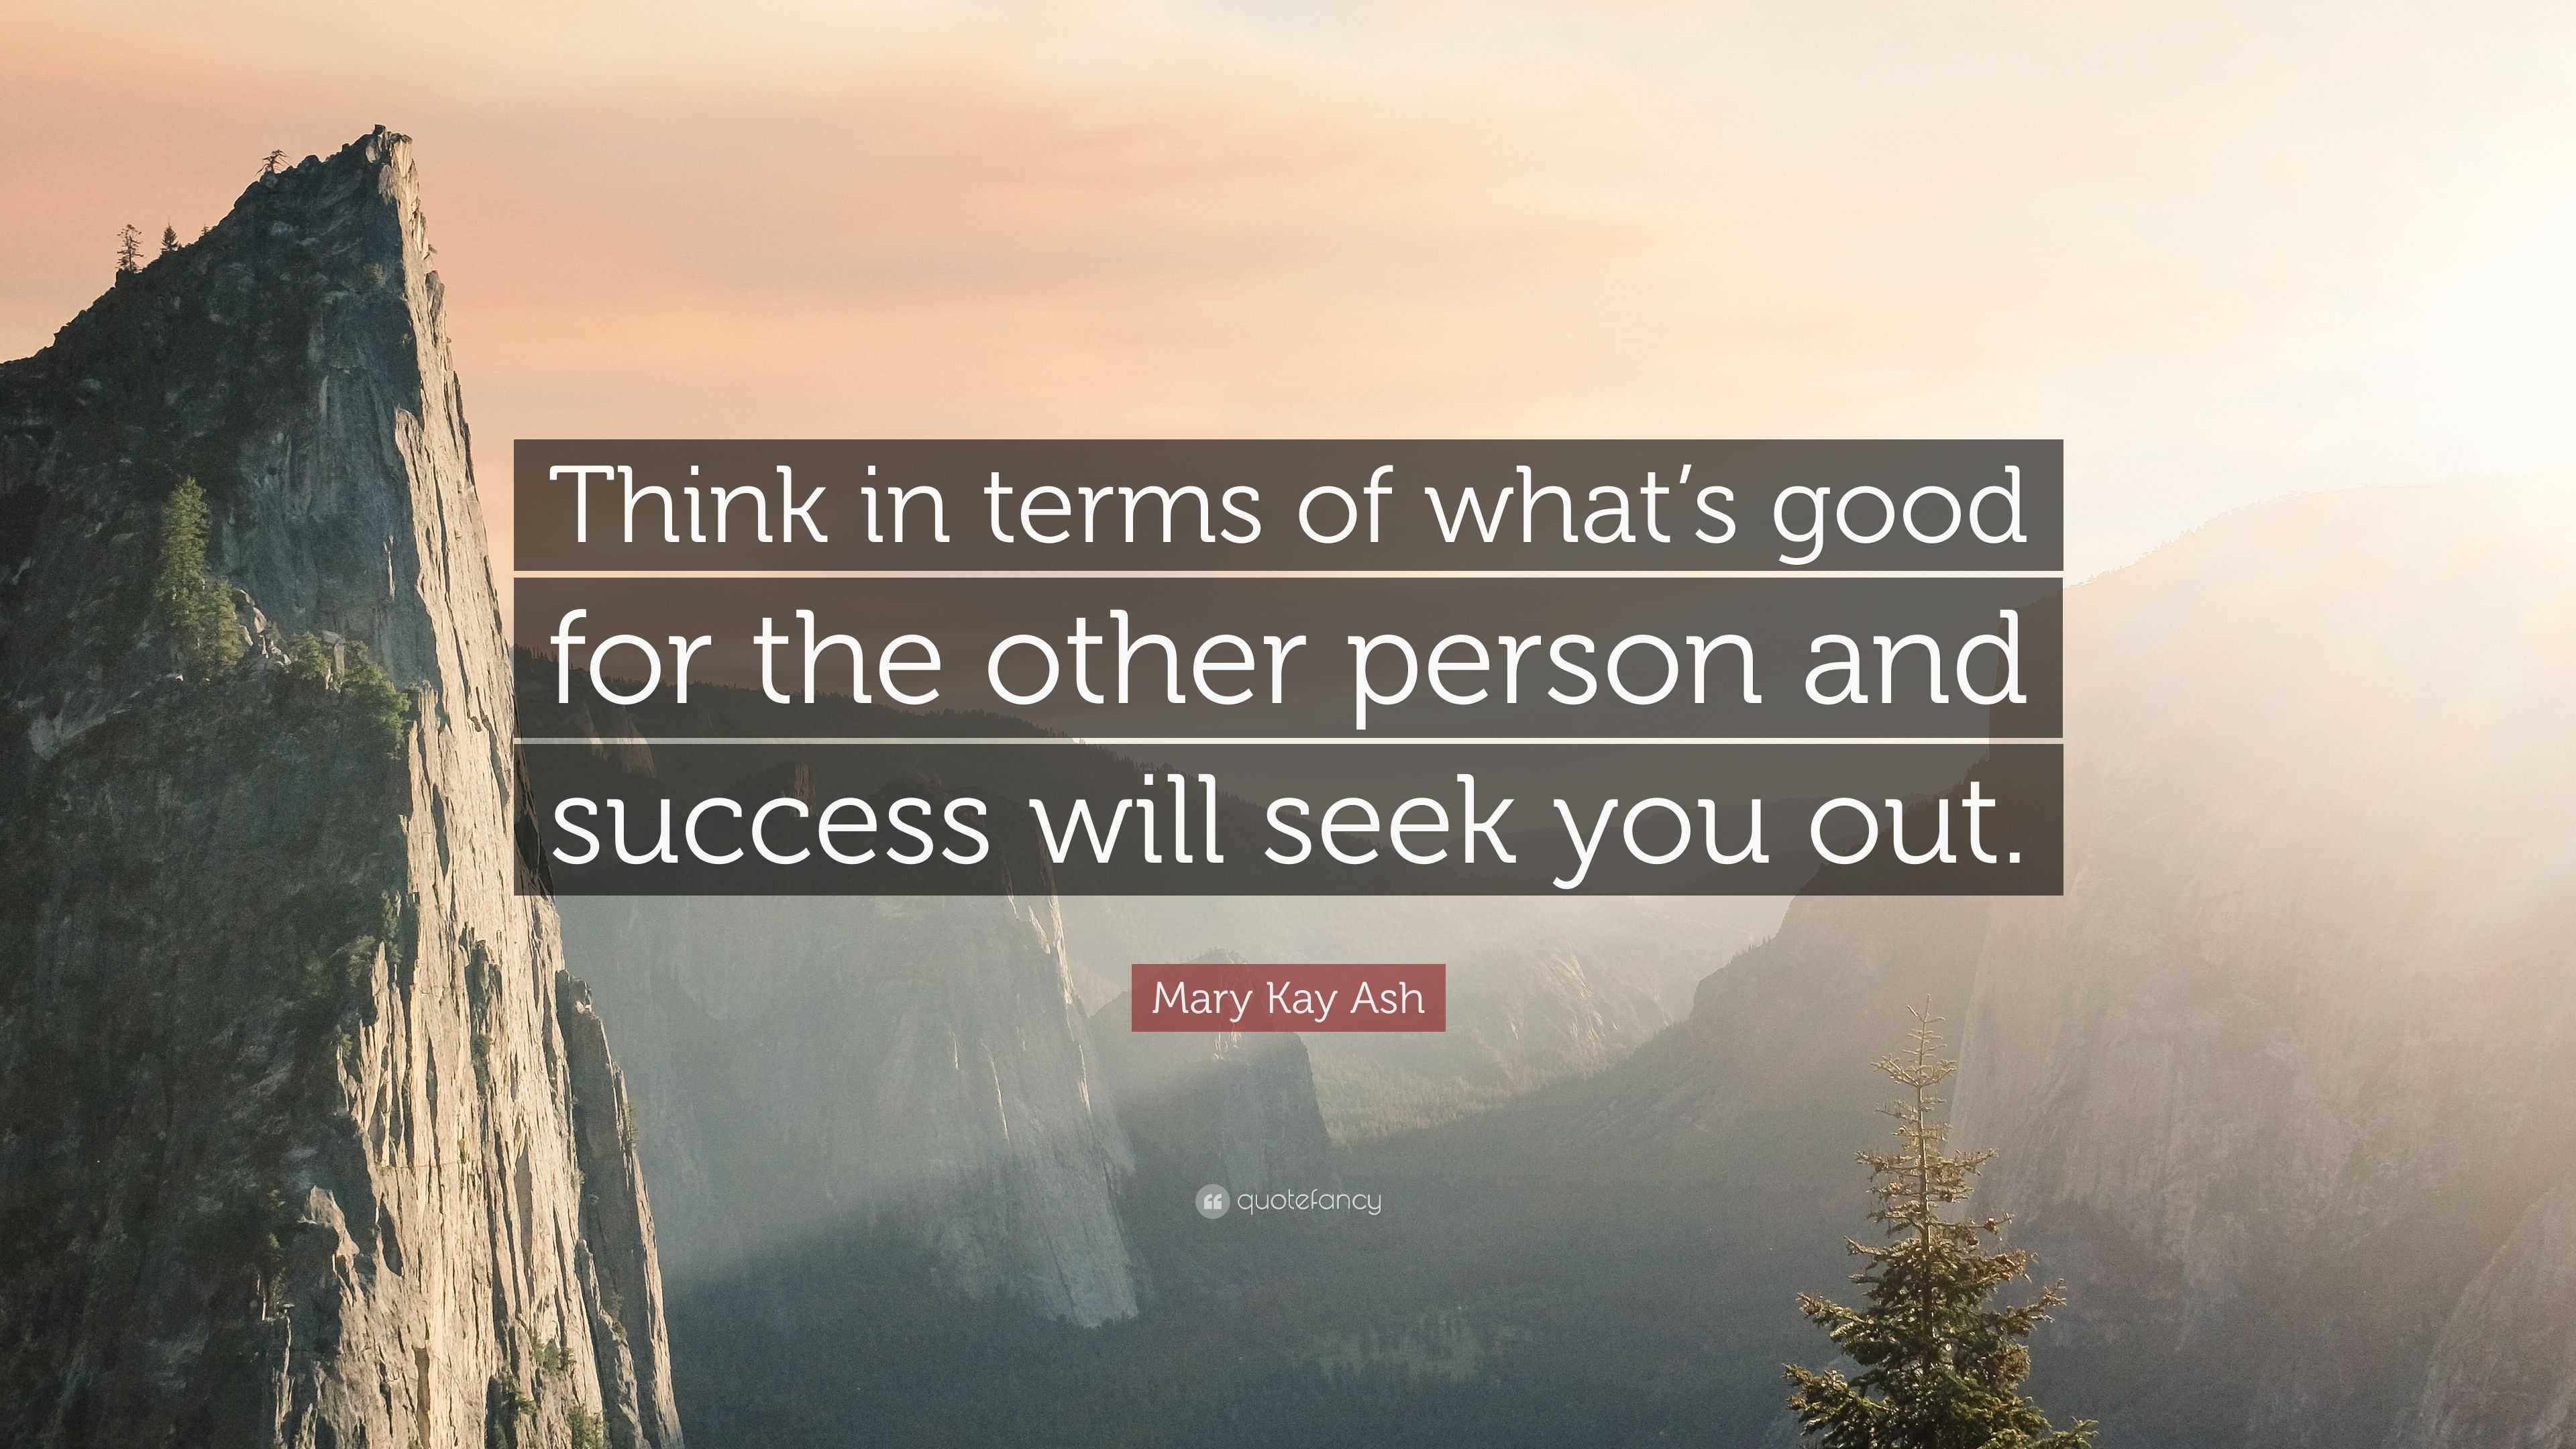 Mary Kay Ash Quote: “Think in terms of what’s good for the other person